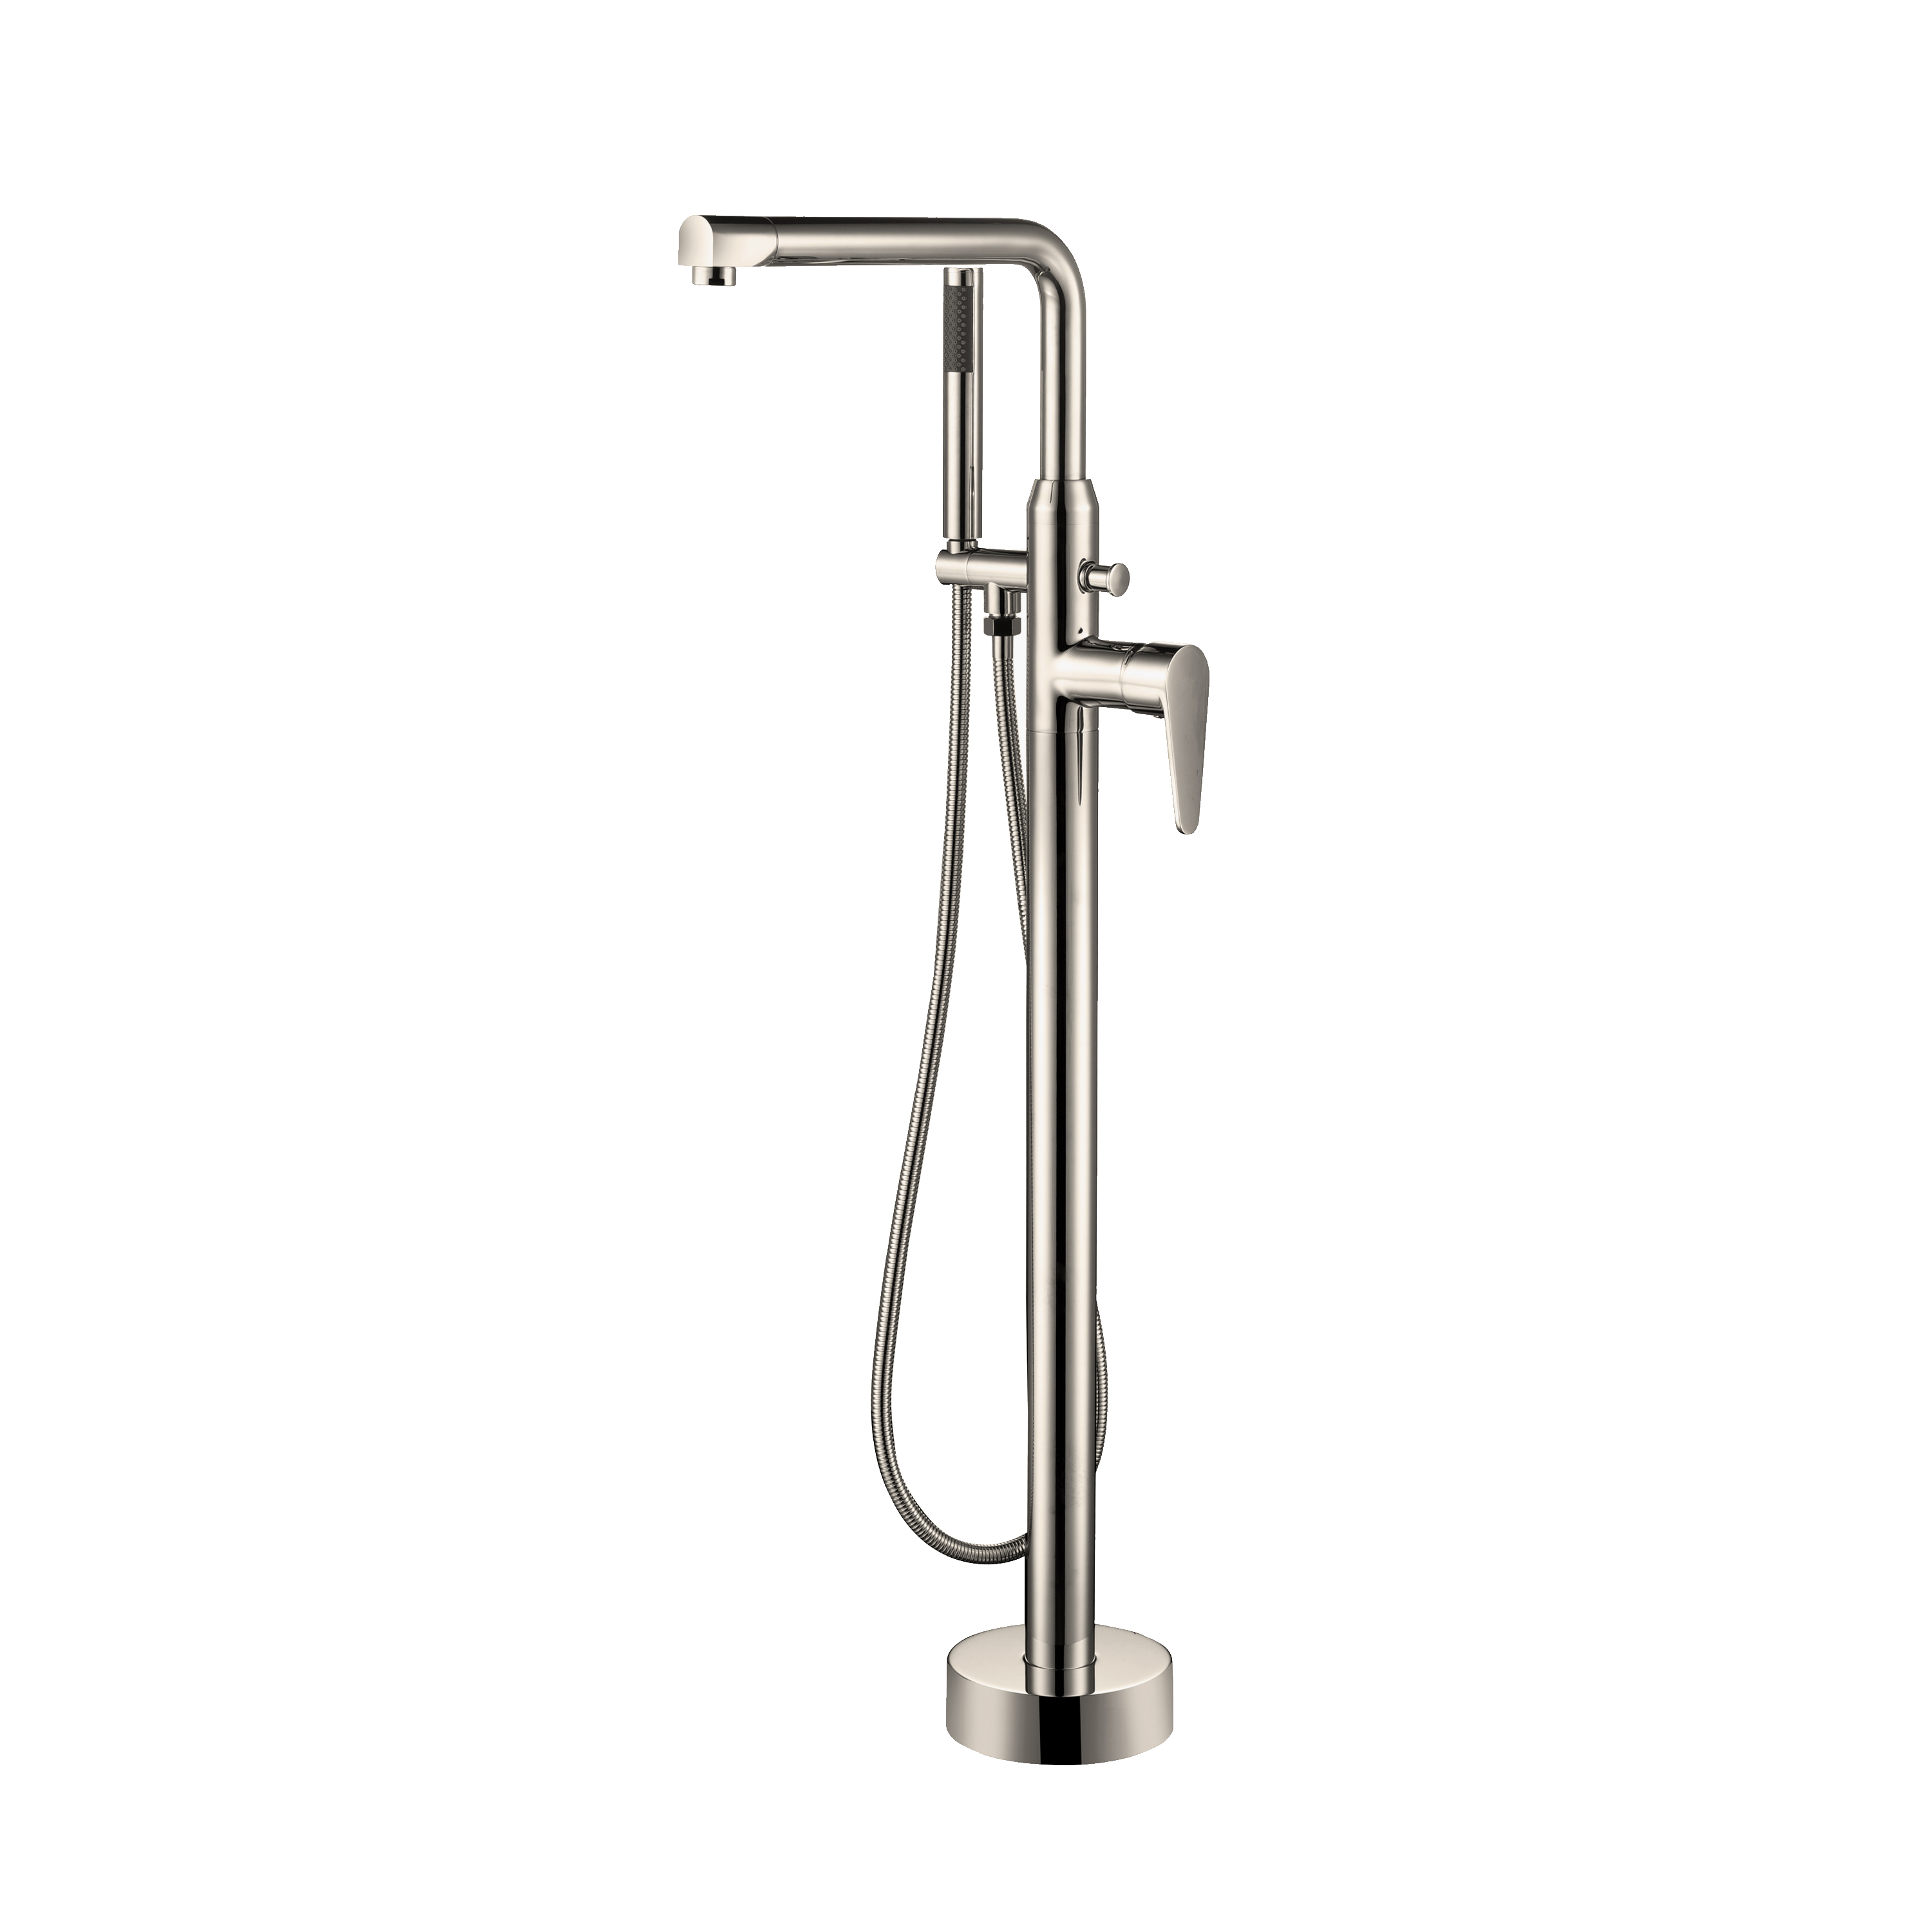 Hot Selling Simple DesignThermostatic Shower Mixer Tub Faucet DF-02044